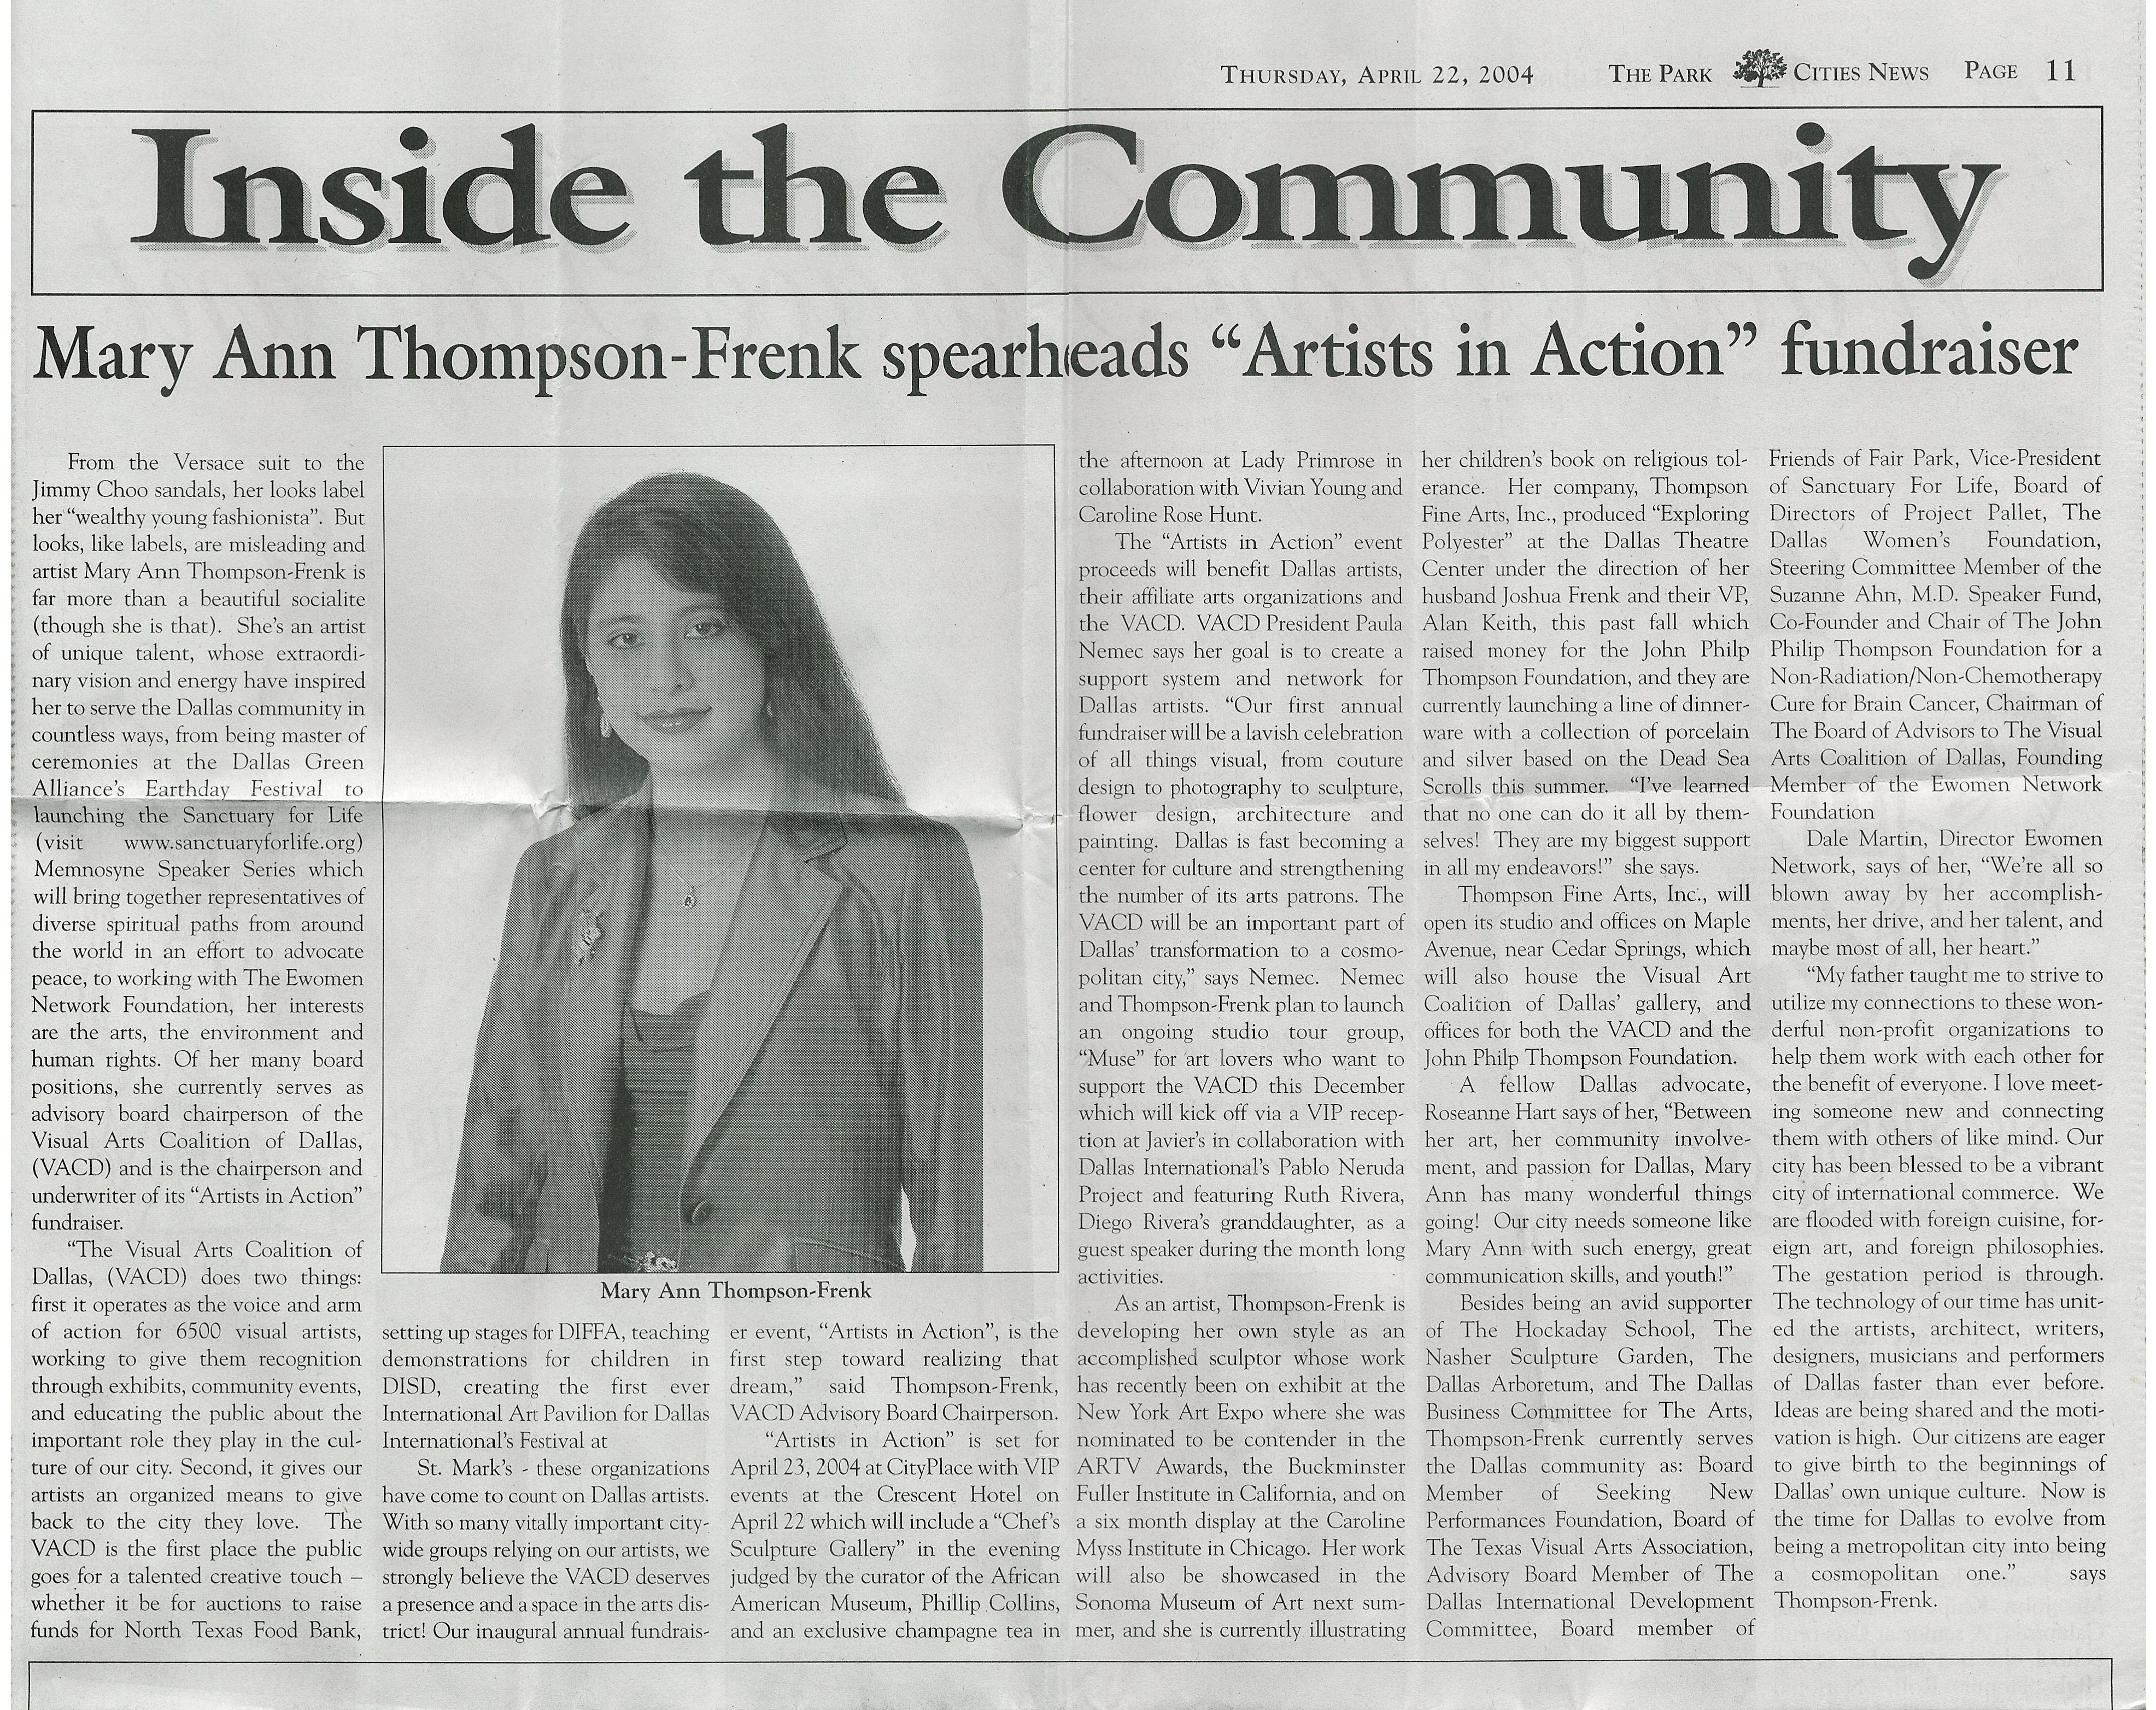 Click here to read Park Cities News Article: Inside The Community-- Mary Ann Thompson-Frenk spearheads "Artists In Action" Fundraiser!